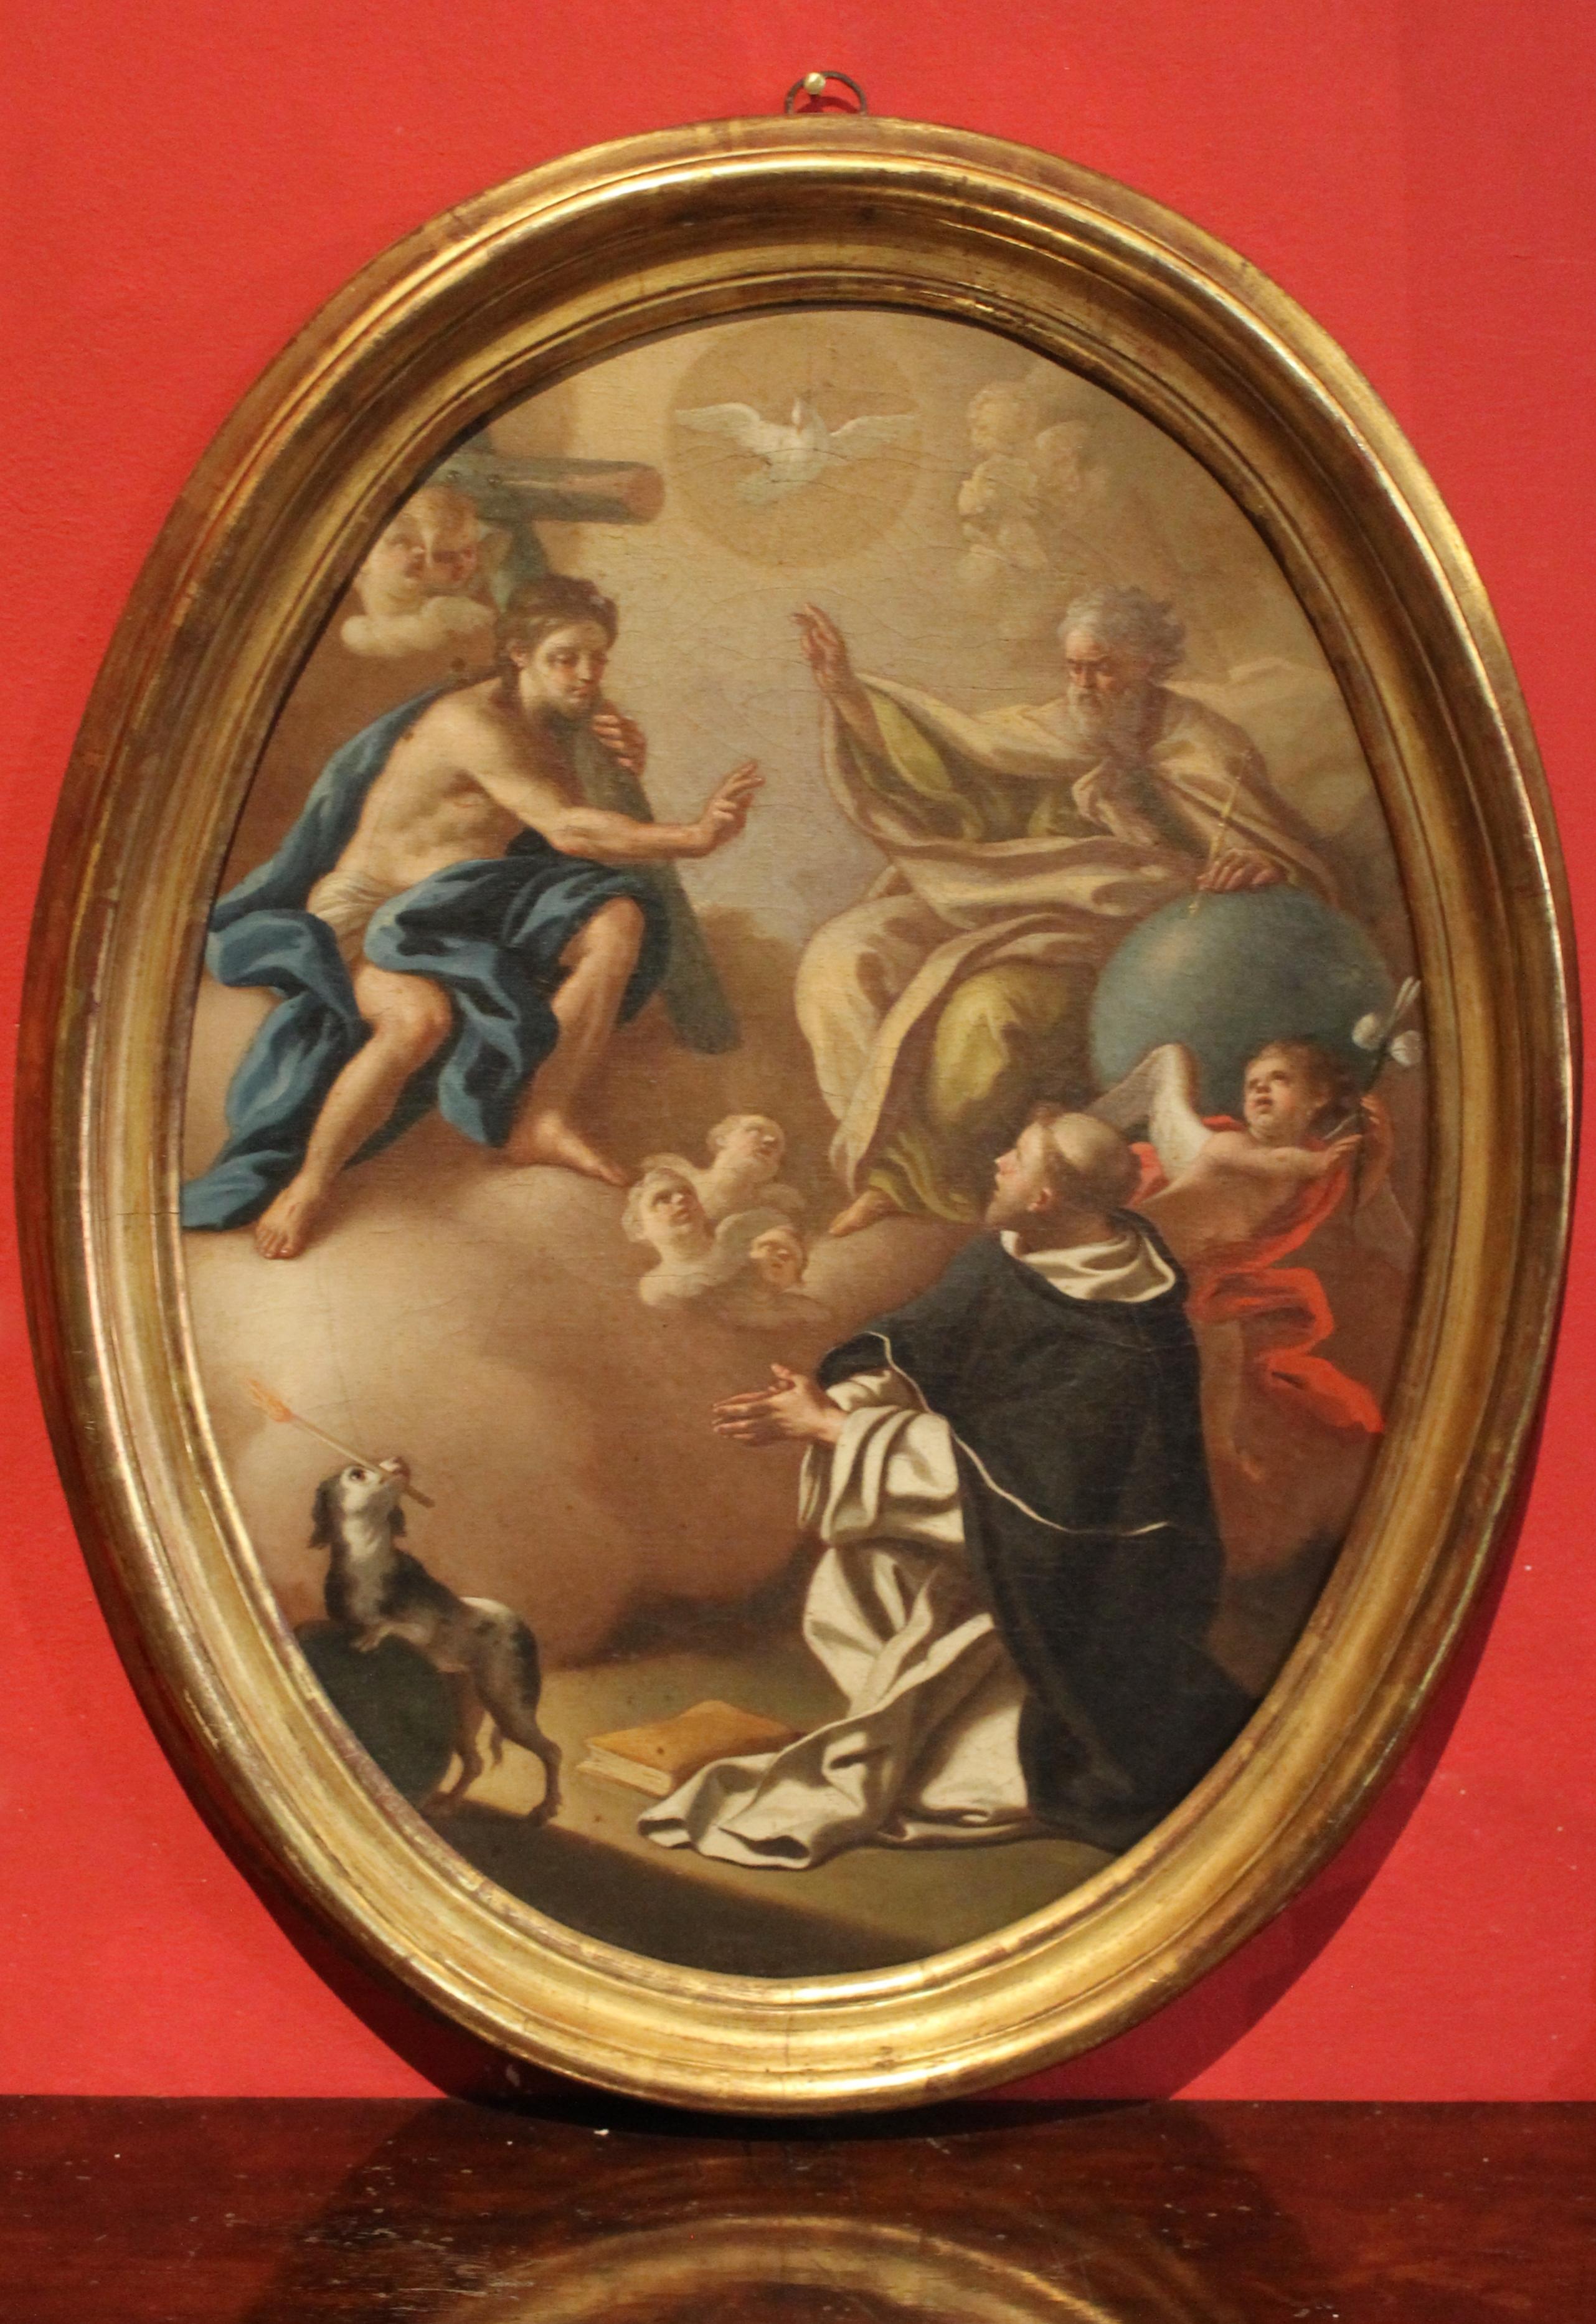 Italian 18th Century Oval Religious Oil on Canvas Painting with Saint Dominic  - Brown Portrait Painting by Francesco de Mura